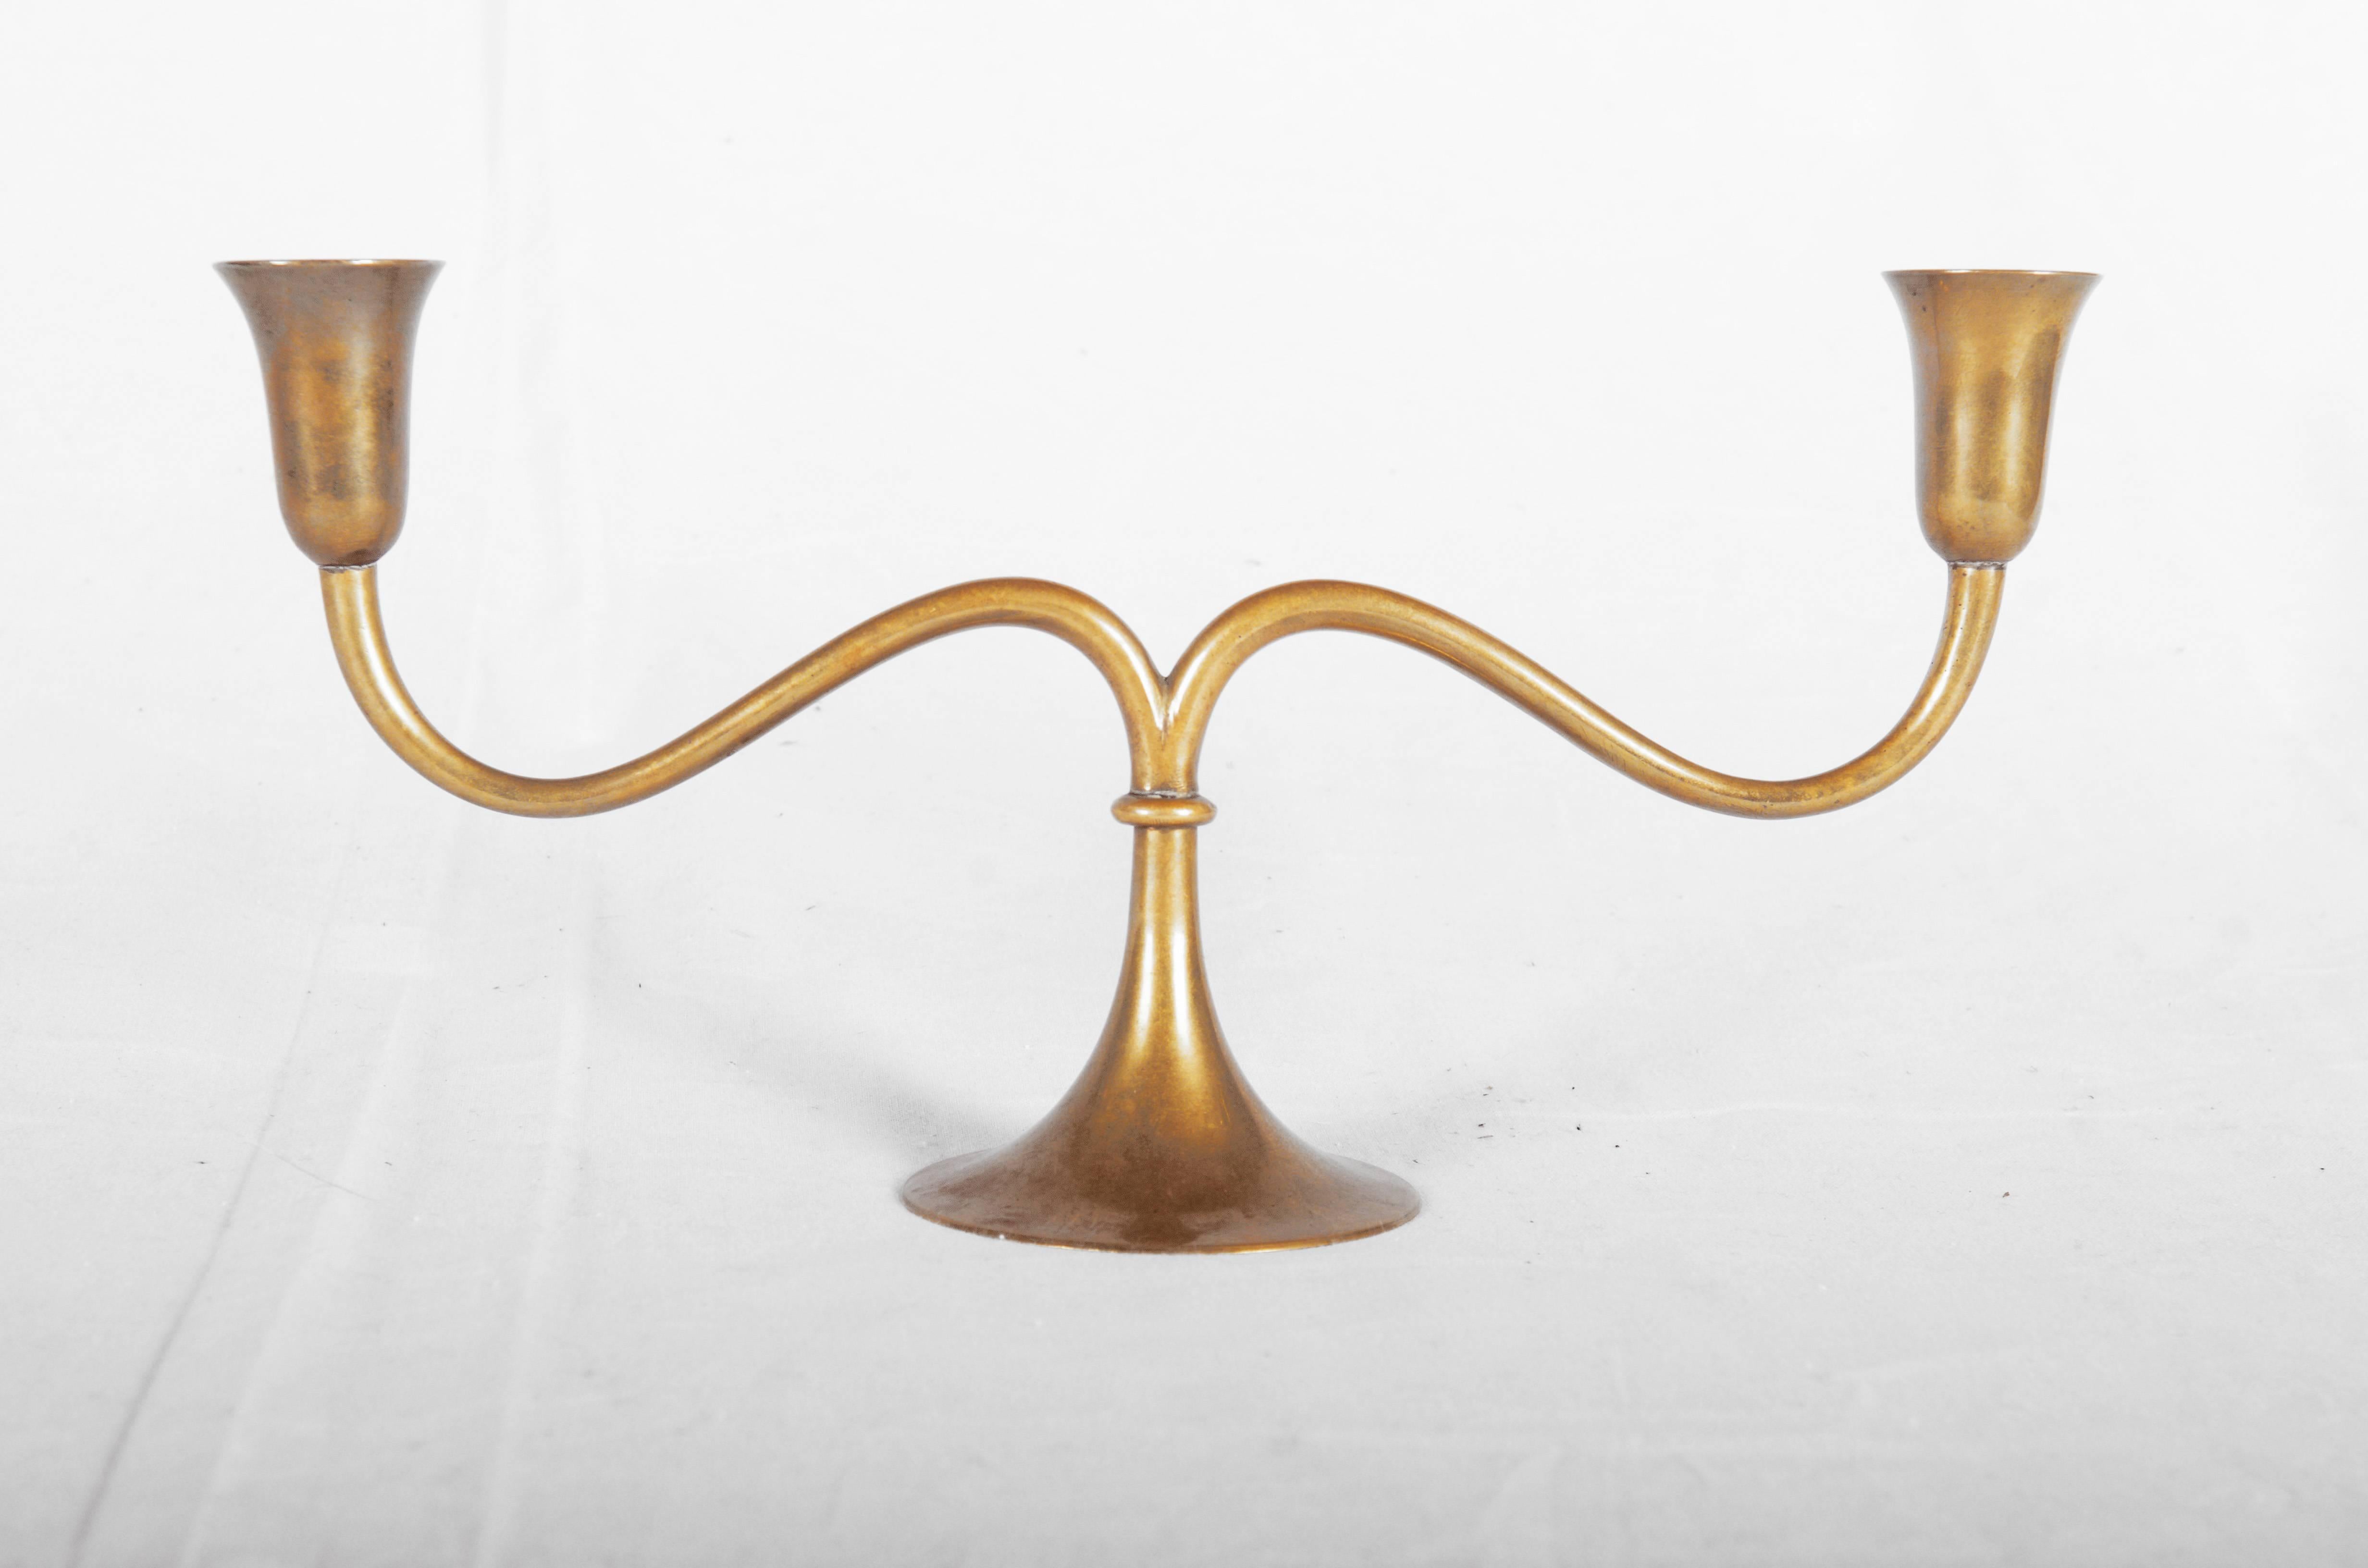 Double brass candlestick by Hagenauer Vienne from the 1930s